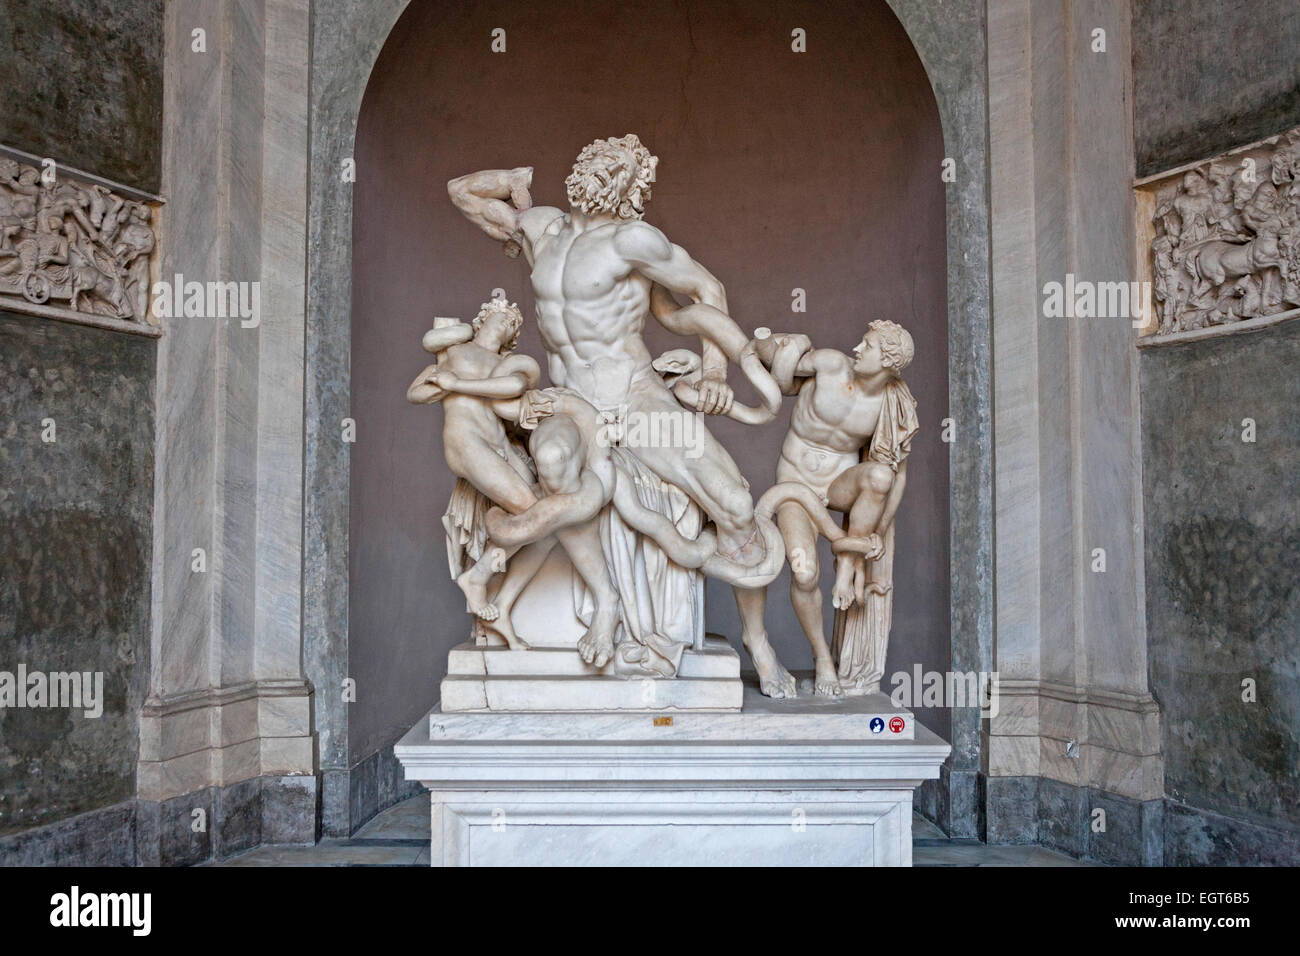 ROME, ITALY: Laocoon and his sons, also owns as Laocoon group, in Museo Pio Clementino Stock Photo